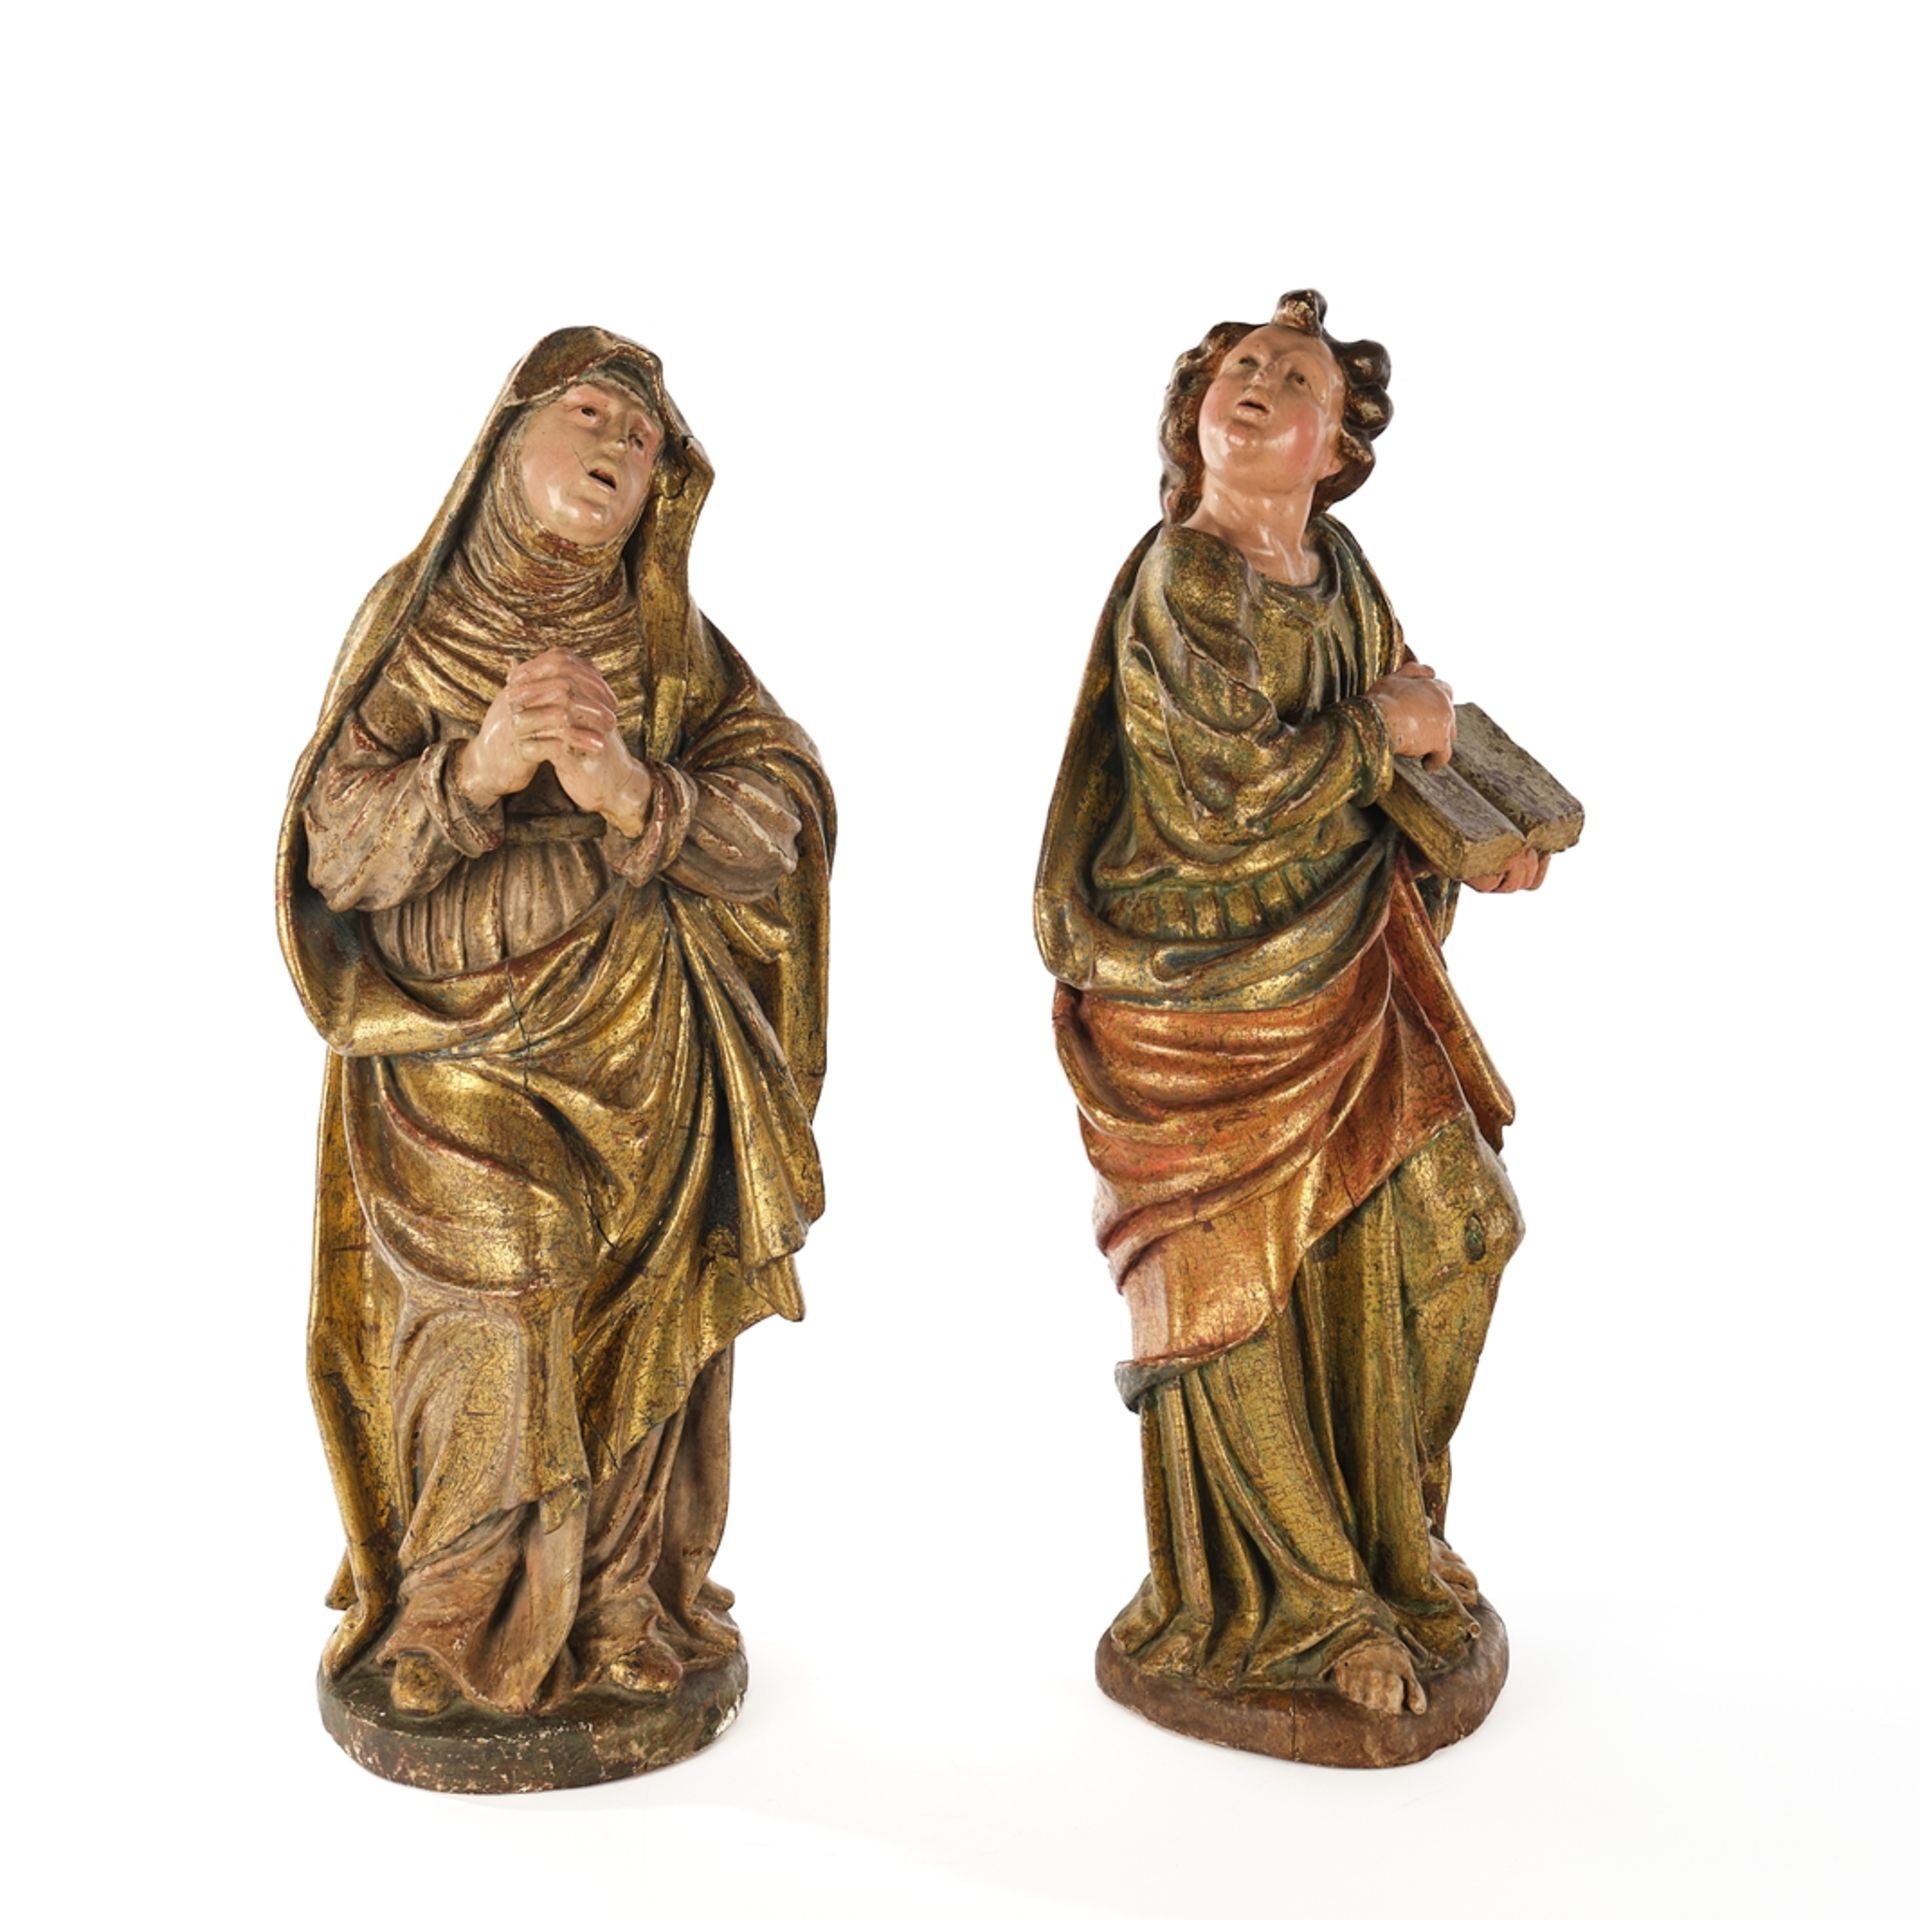 2 wooden figures(17th century),"Mary"and "John",(17th century),